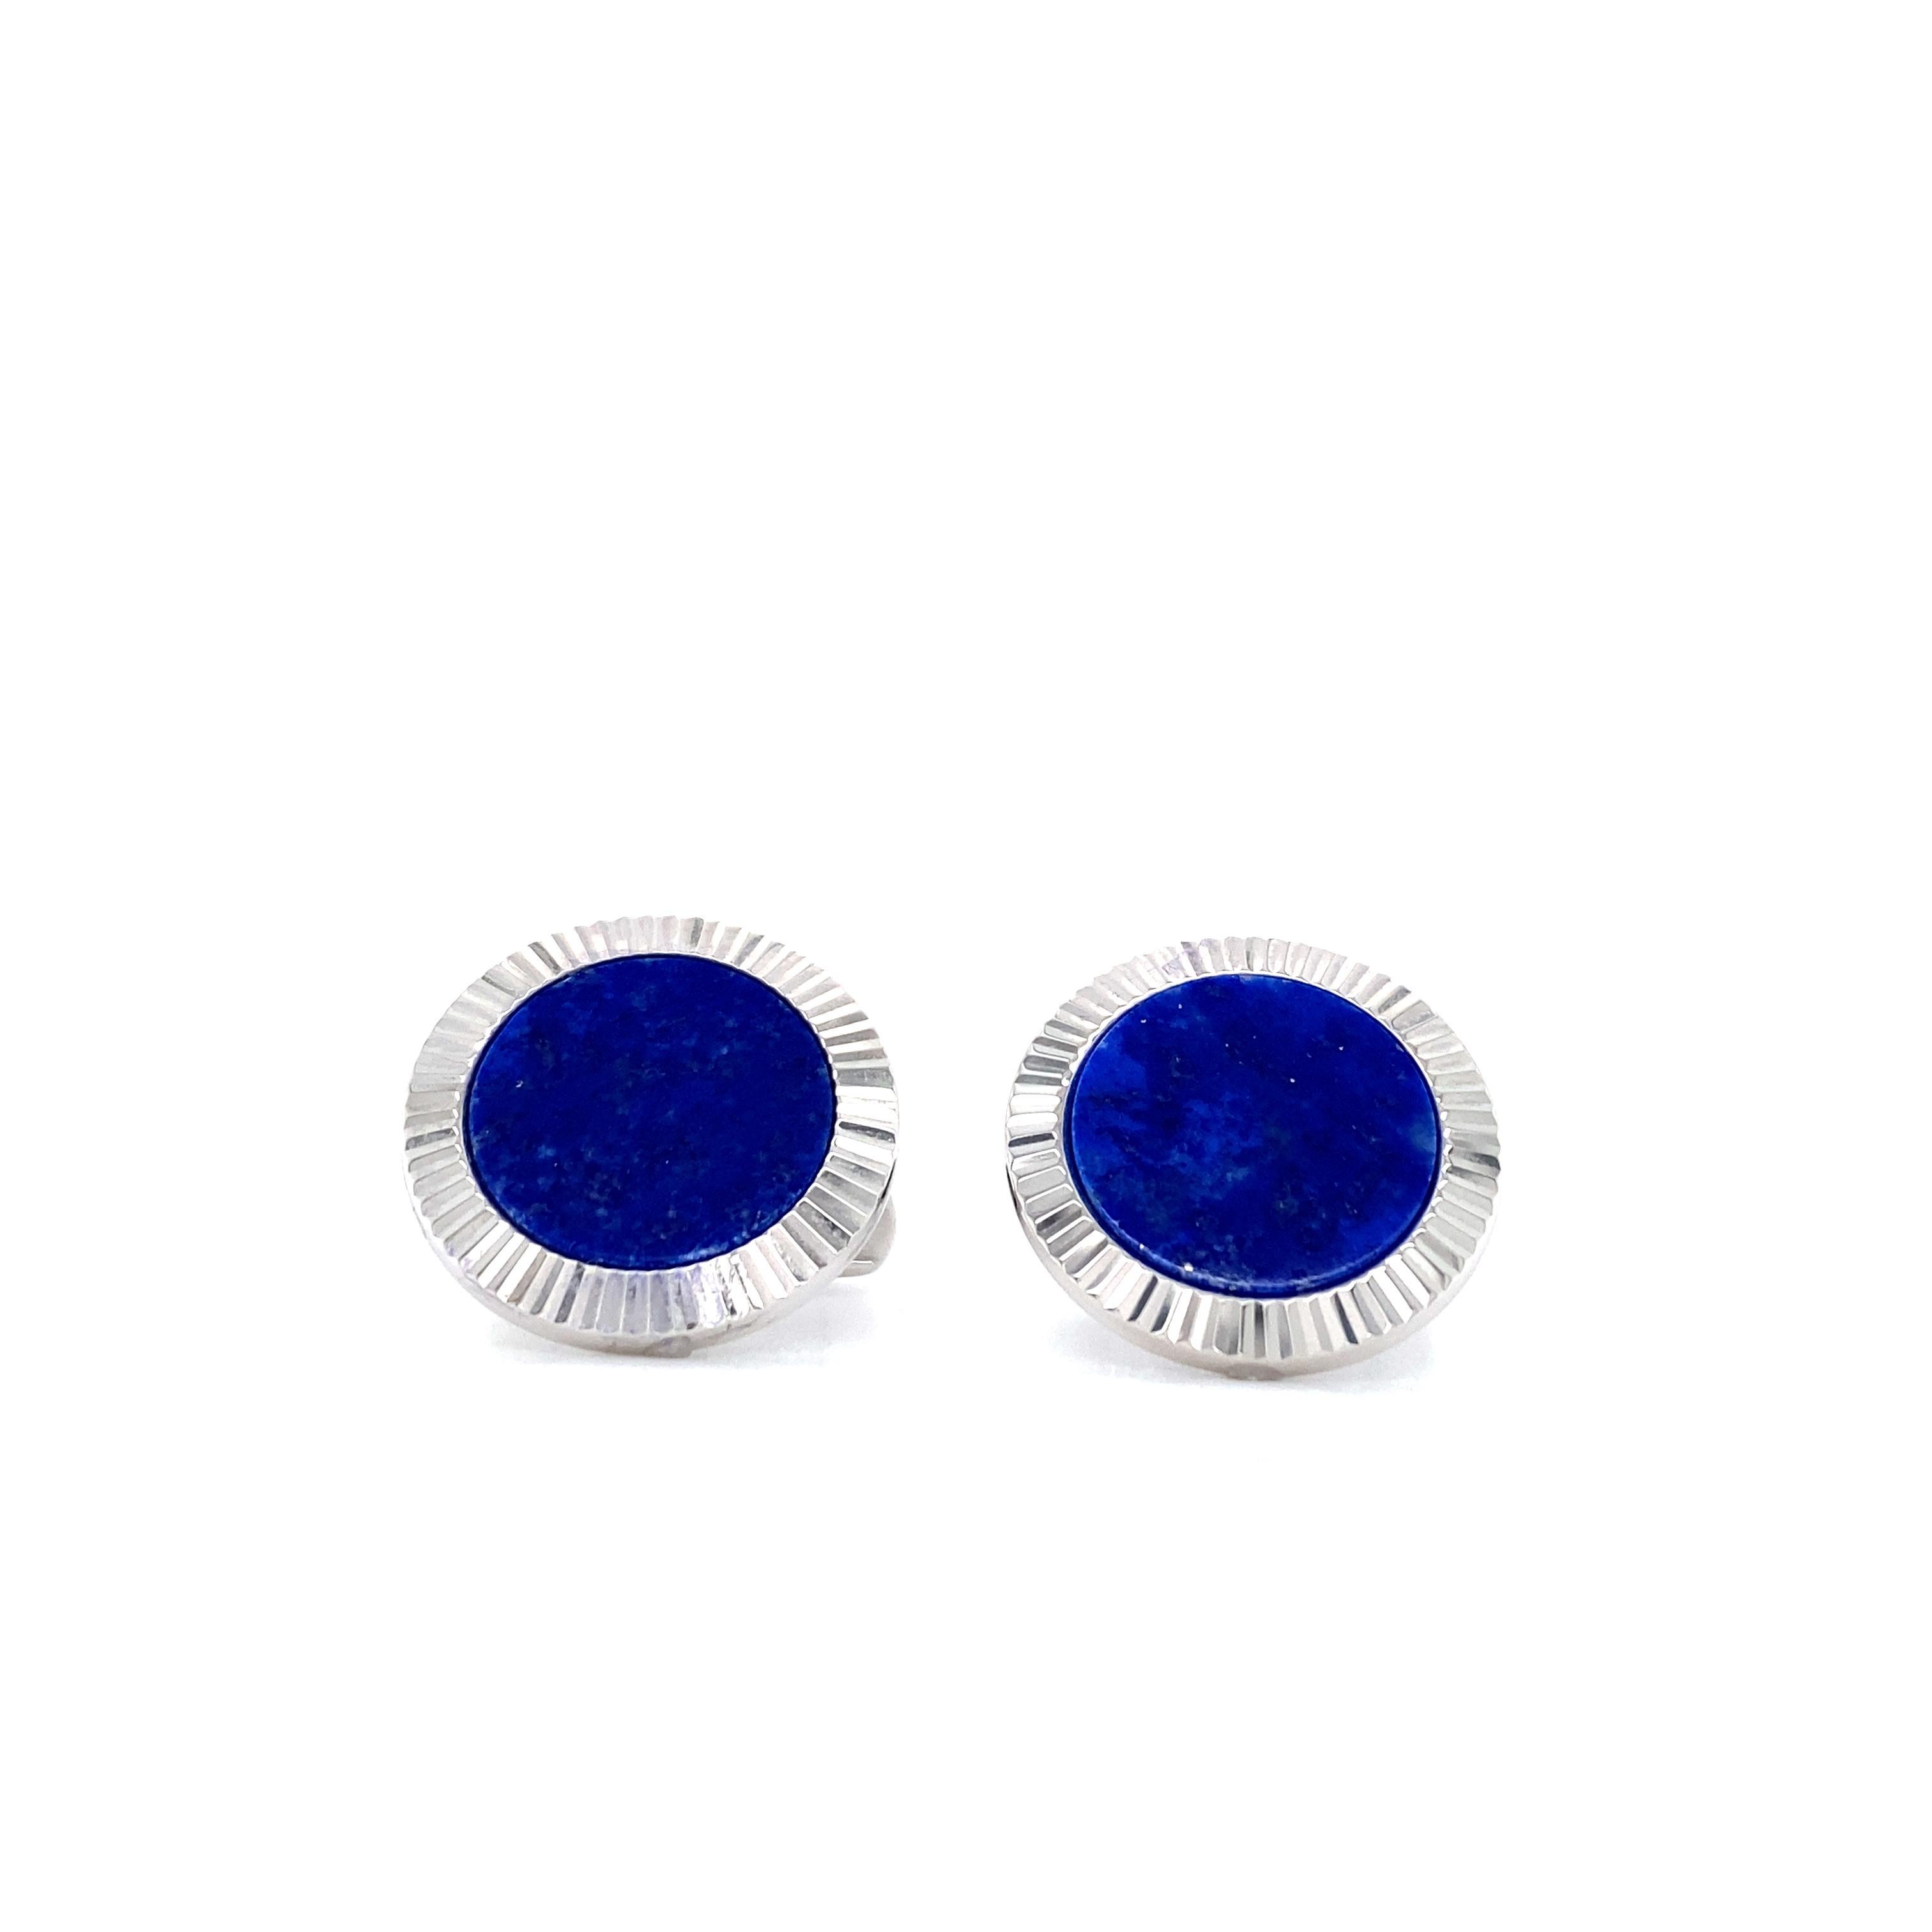 Round Cut Fluted Round Lapis Lazuli Cufflinks in Solid 925 Sterling Silver, Rhodium Plated For Sale